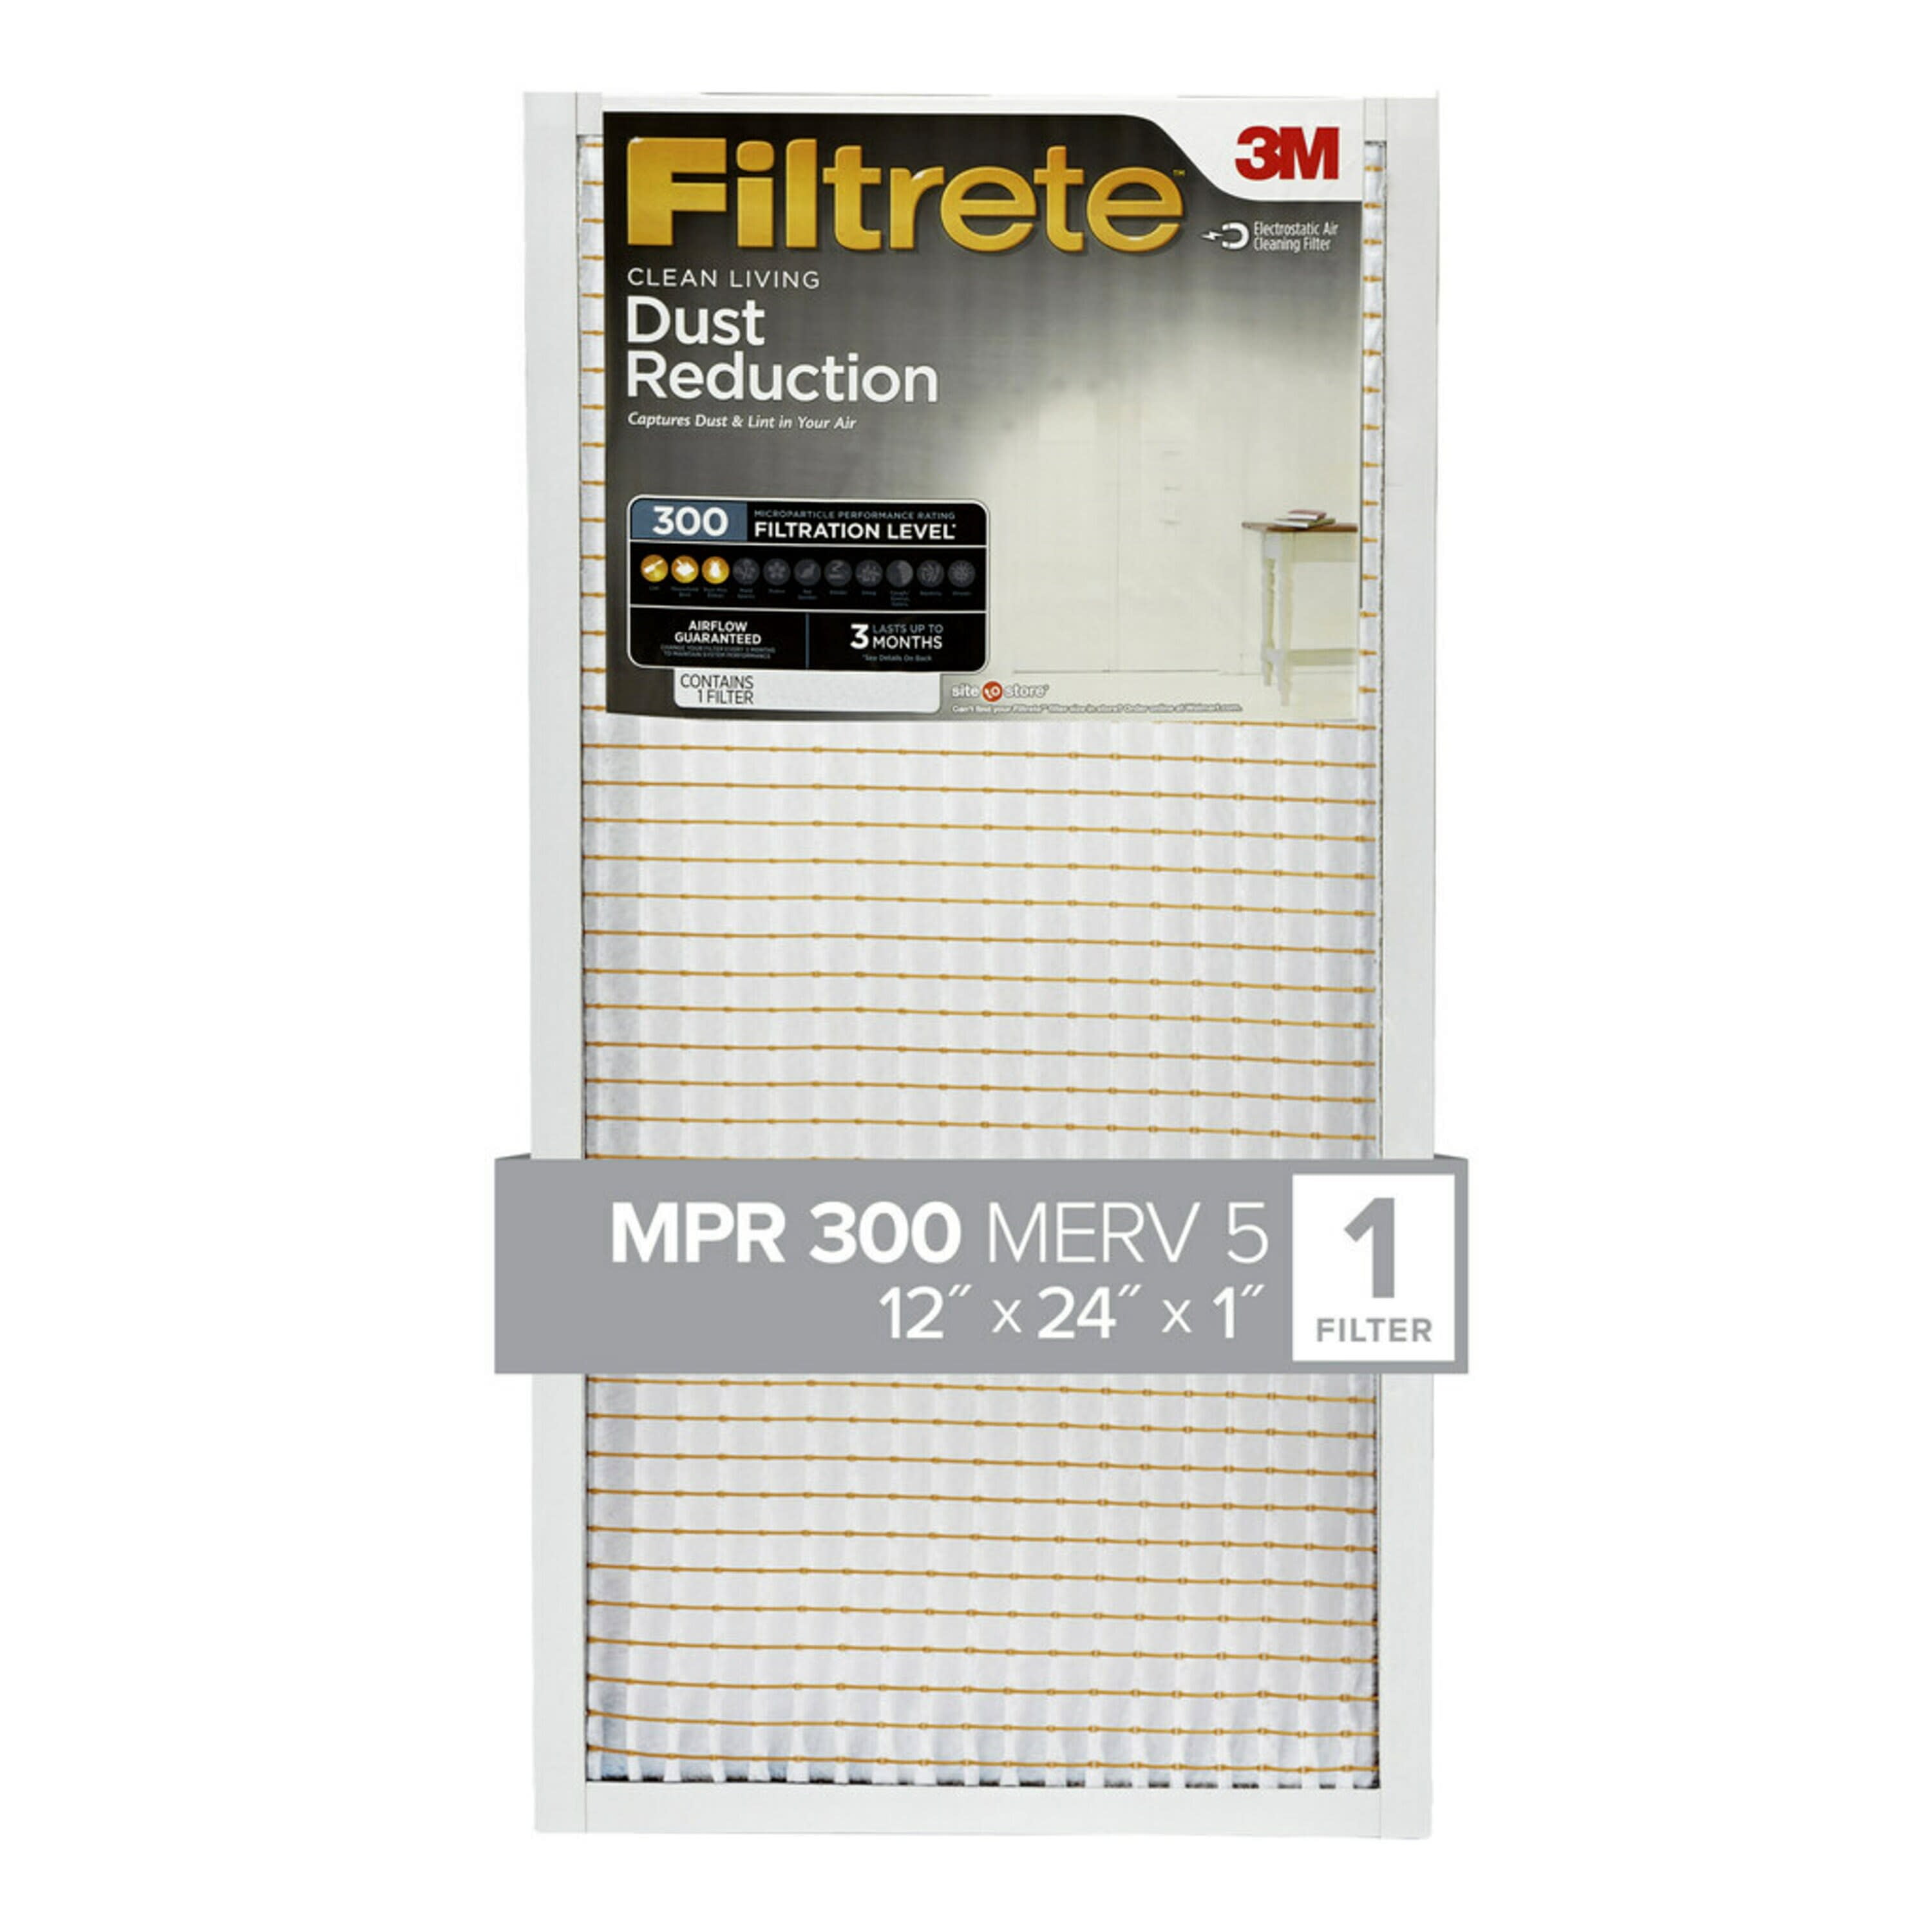 Nordic Pure 14x18x1 MPR 1085 Pleated Micro Allergen Extra Reduction Replacement AC Furnace Air Filters 3 Pack